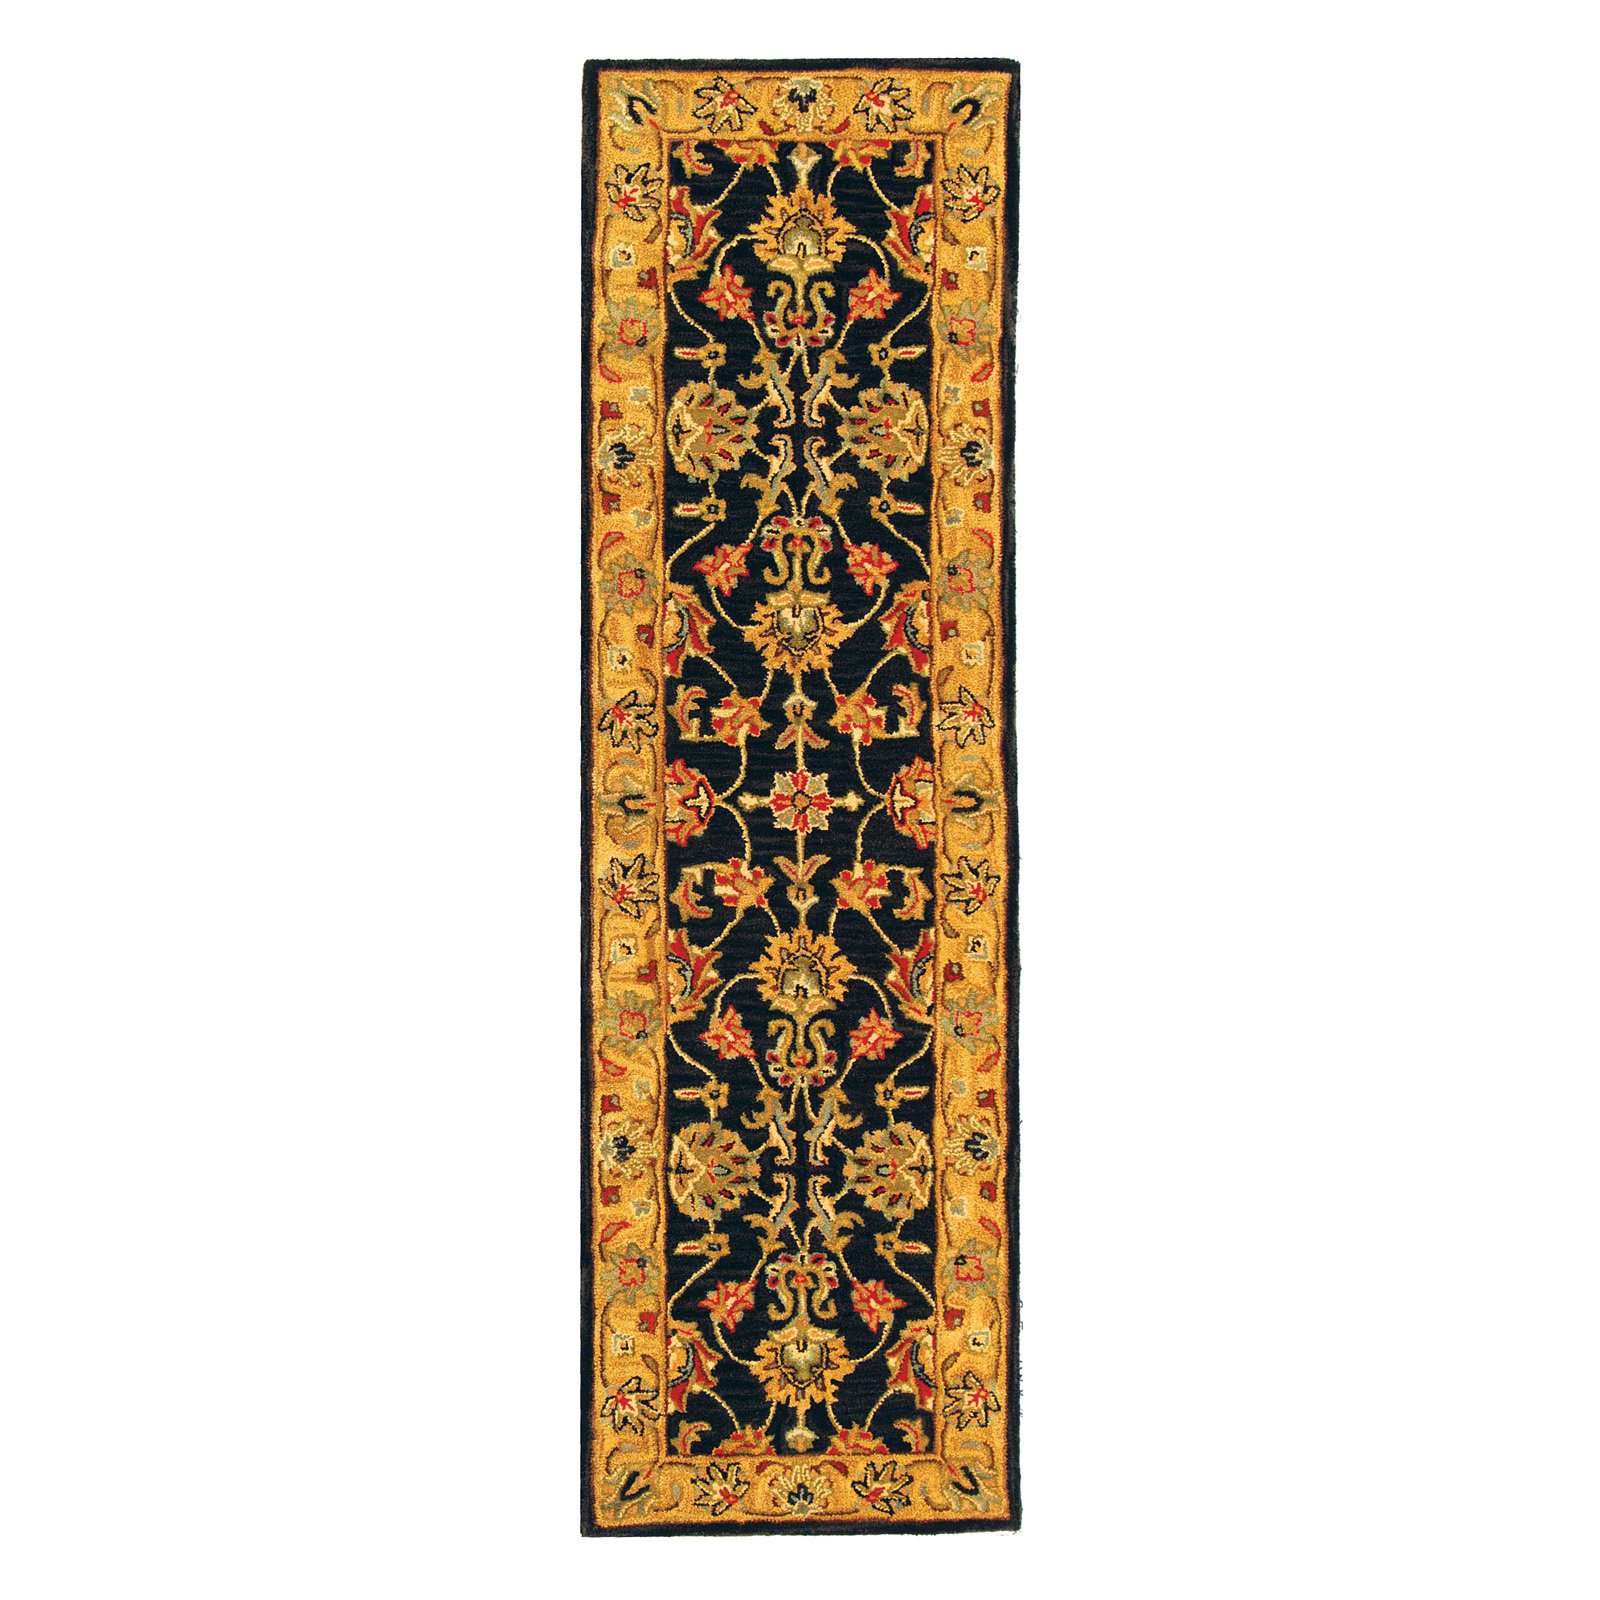 SAFAVIEH Heritage Regis Traditional Wool Area Rug, Charcoal/Gold, 7'6" x 9'6" - image 4 of 10